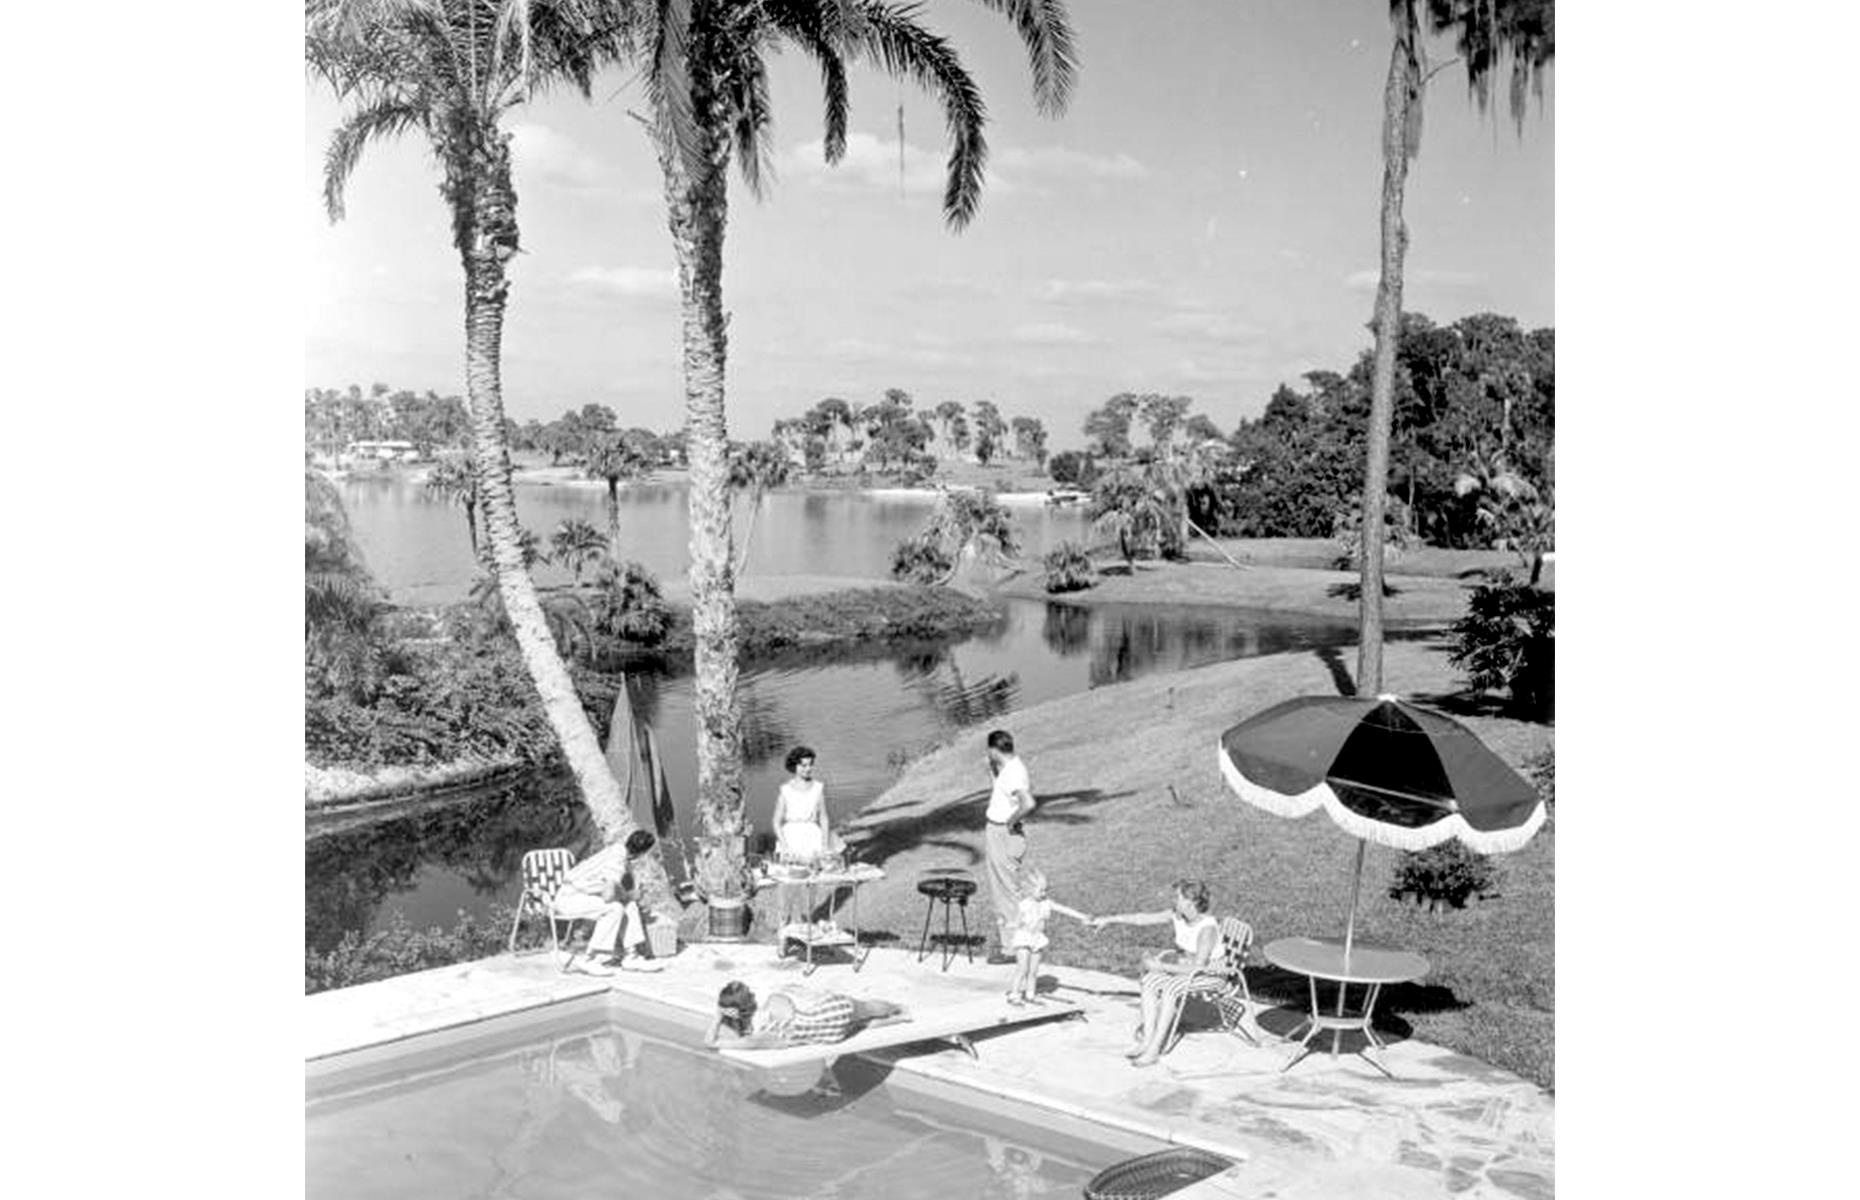 Those who preferred things at a slower pace could relax around Cypress Gardens' patio and pool areas. Papped in 1956, this family enjoys a poolside cook-out under the Florida palms.